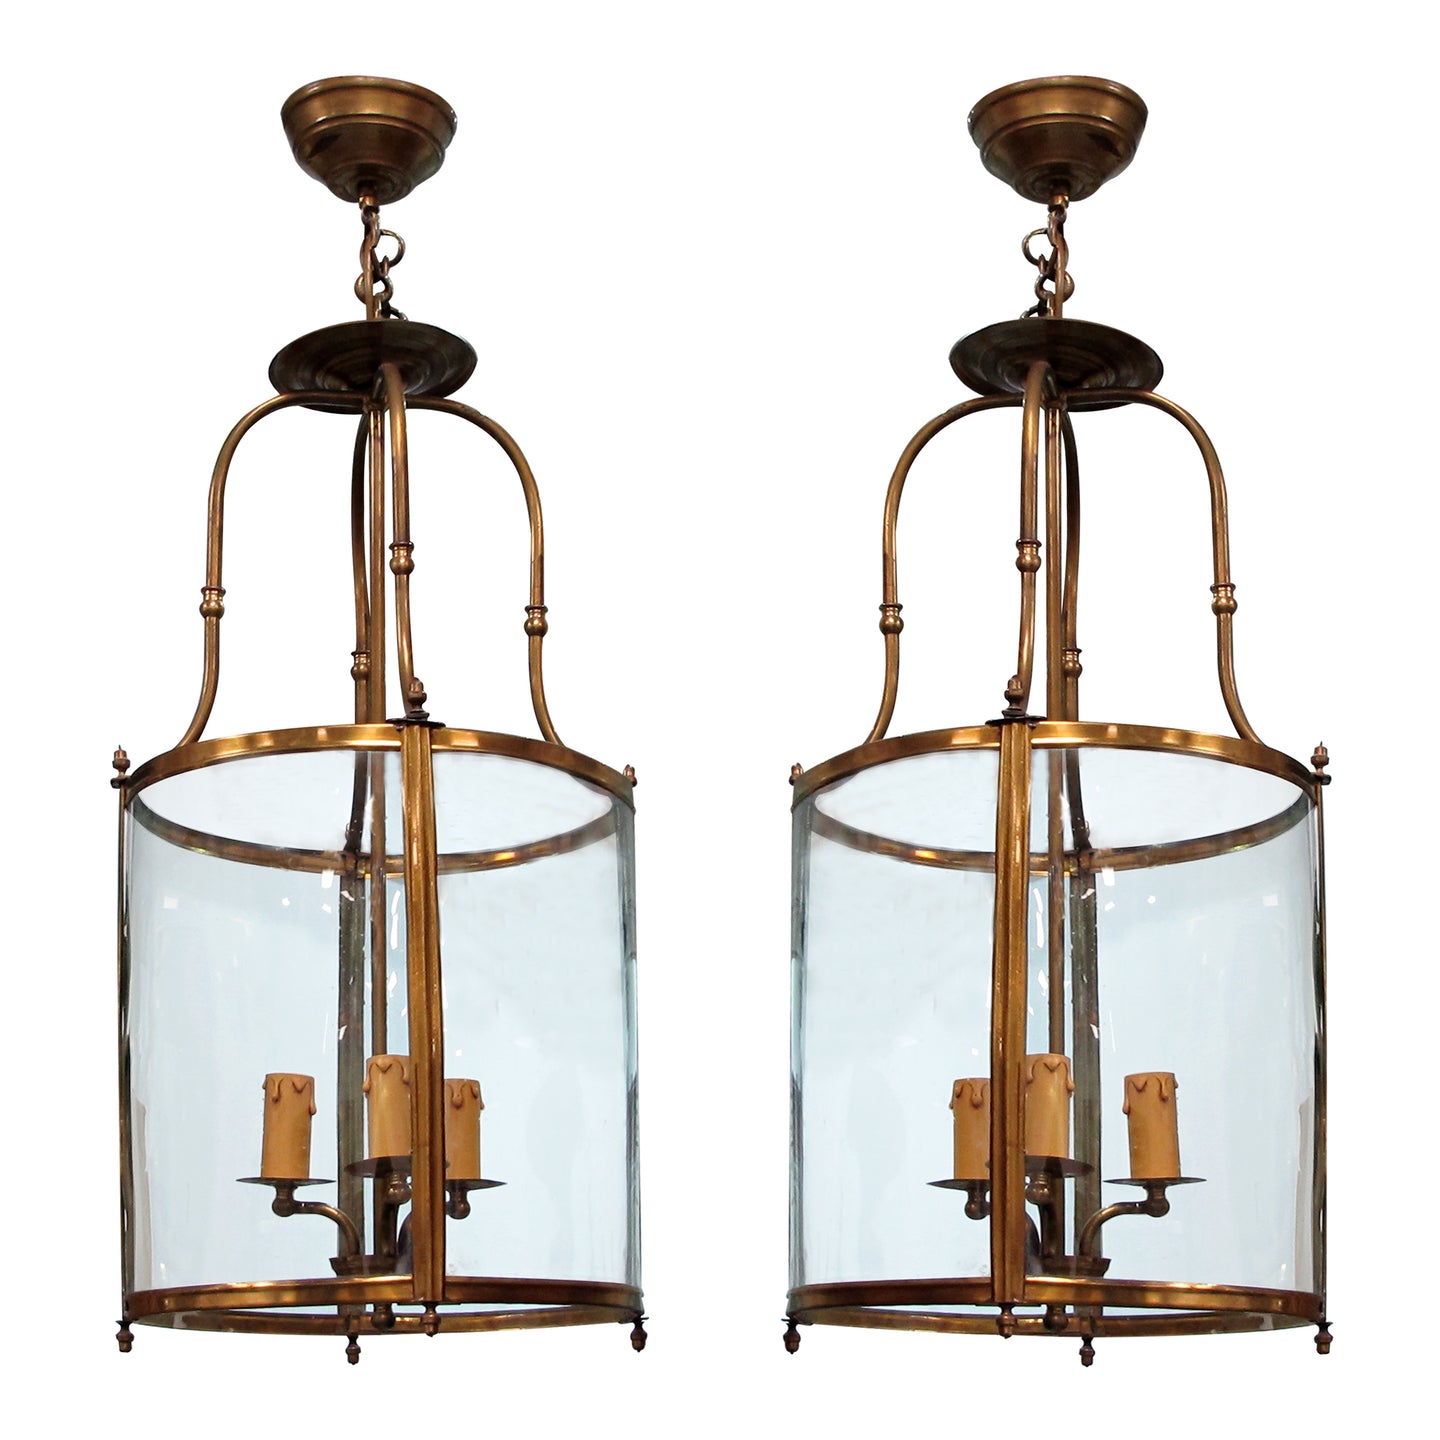 Late 19th Century Pair of Neoclassical Style Curved Glass Brass Lanterns, French